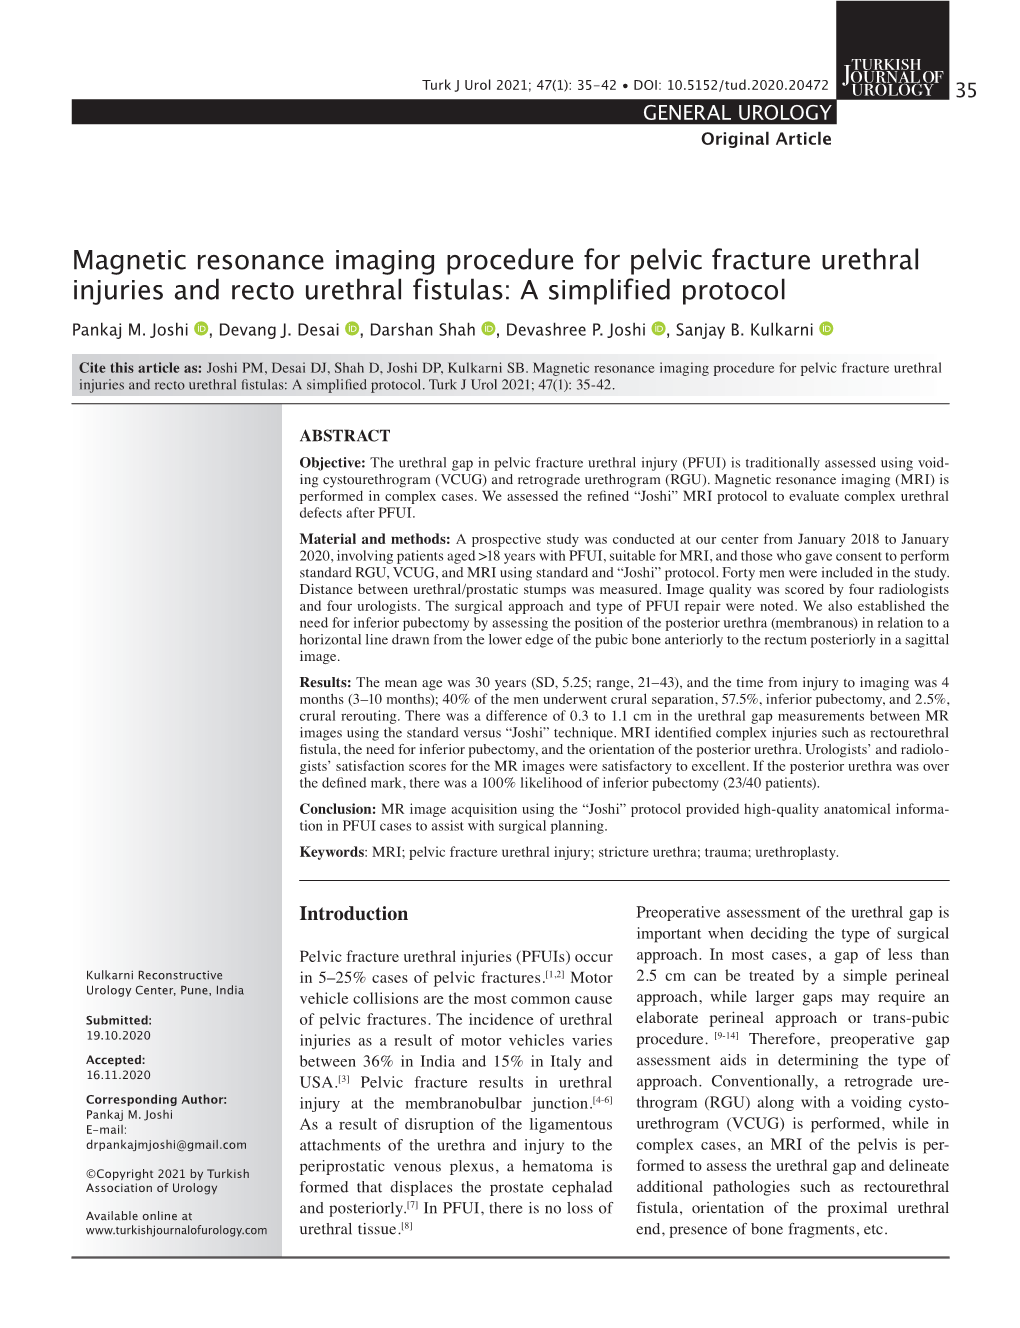 Magnetic Resonance Imaging Procedure for Pelvic Fracture Urethral Injuries and Recto Urethral Fistulas: a Simplified Protocol Pankaj M